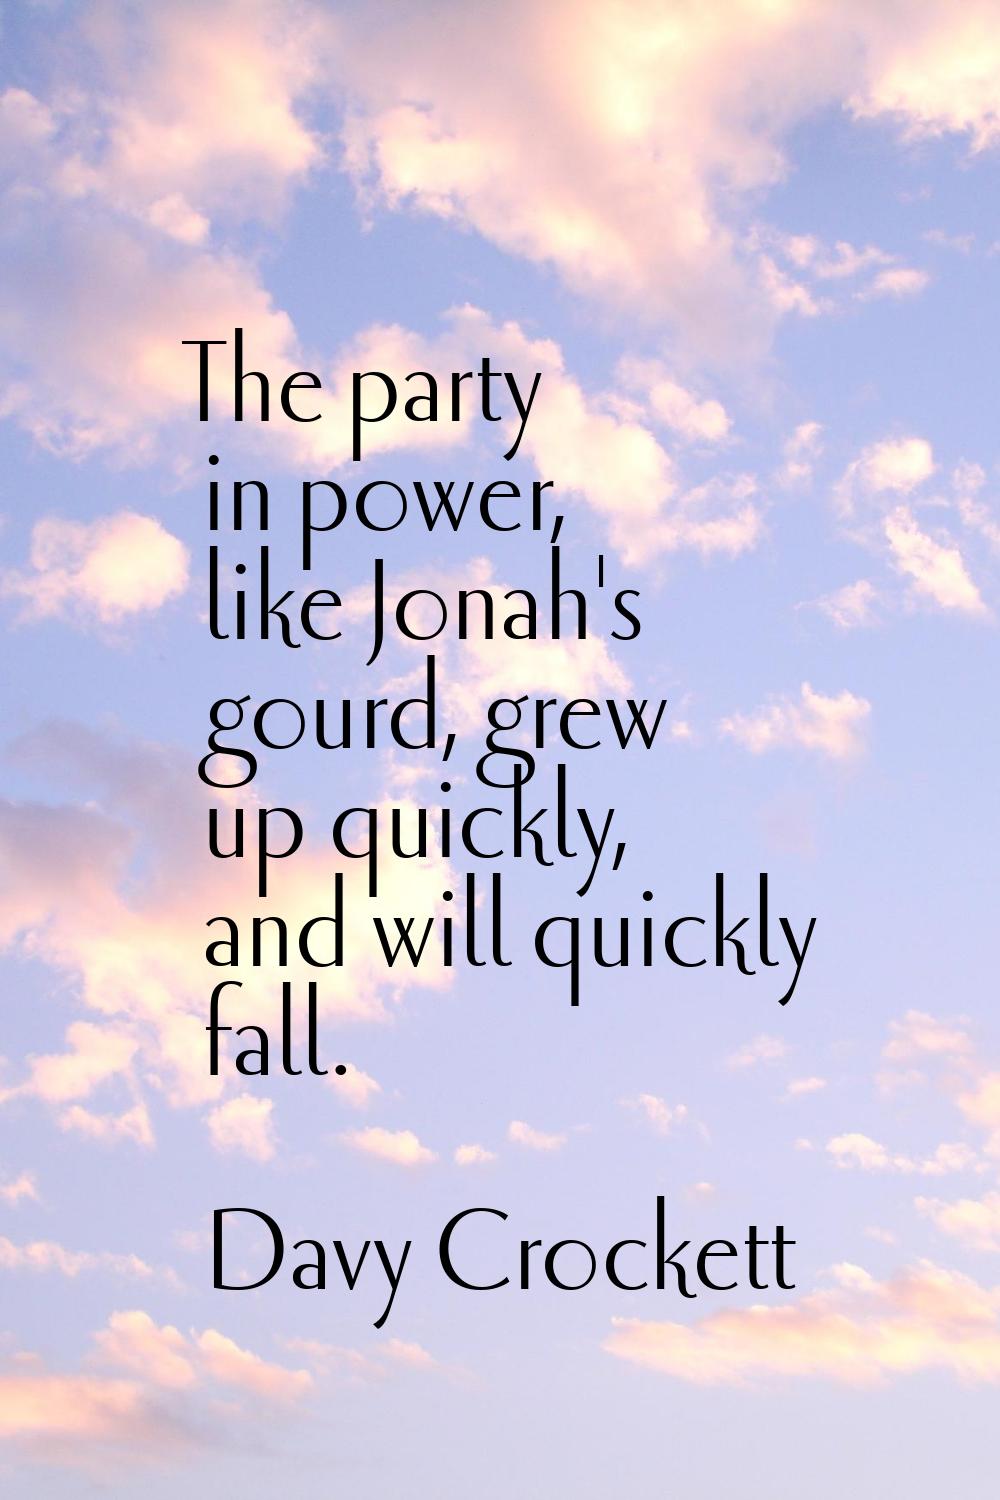 The party in power, like Jonah's gourd, grew up quickly, and will quickly fall.